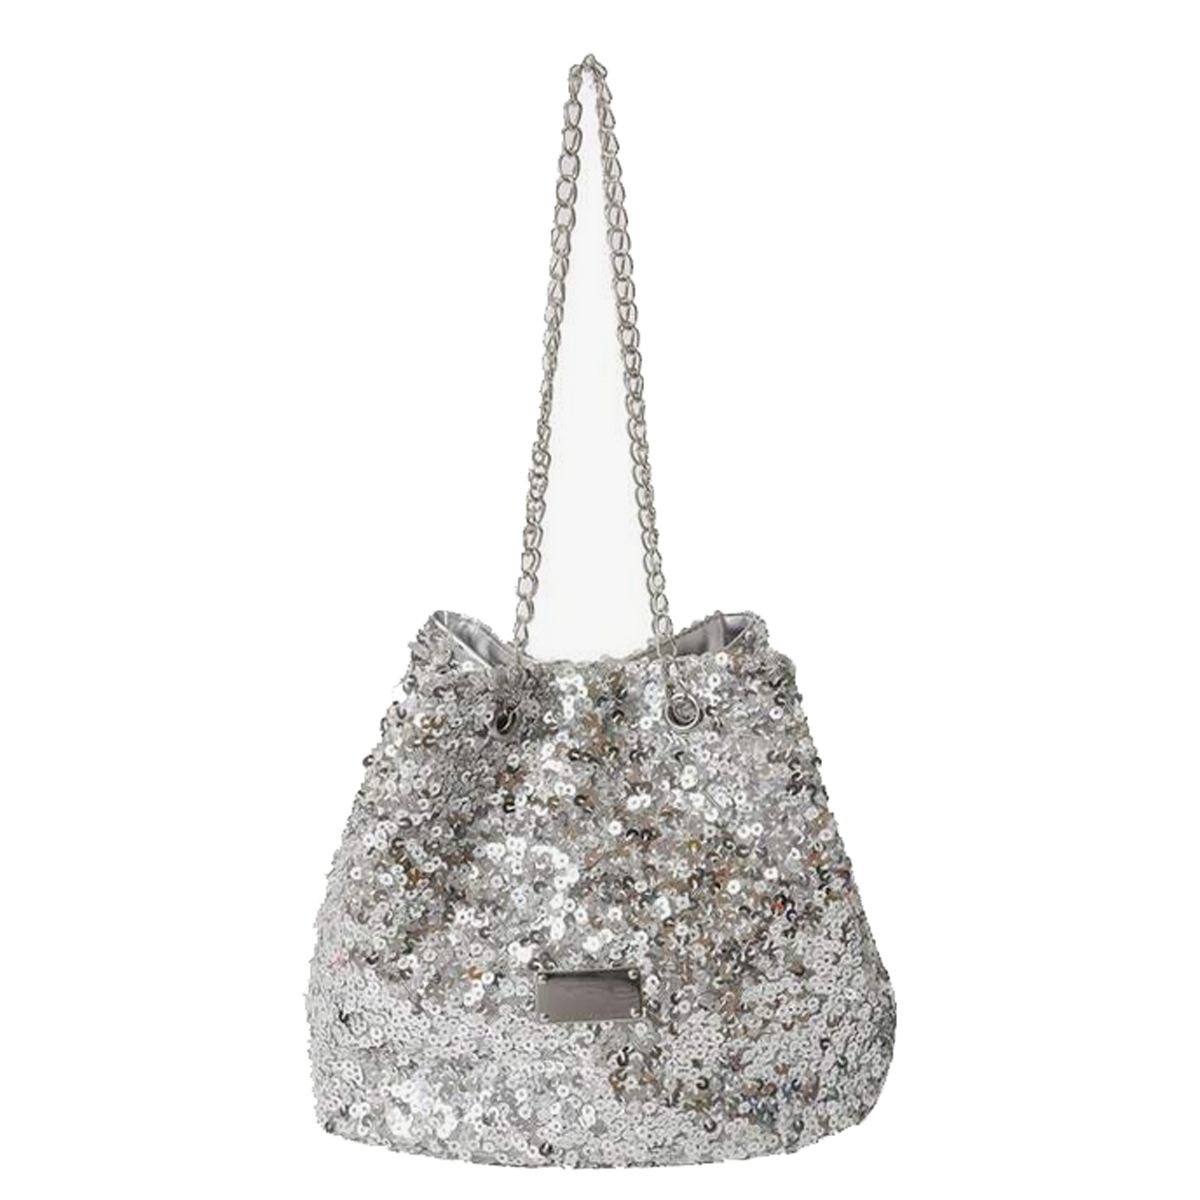 SPARKLY SEQUIN EVENING BUCKET BAG PARTY PROM